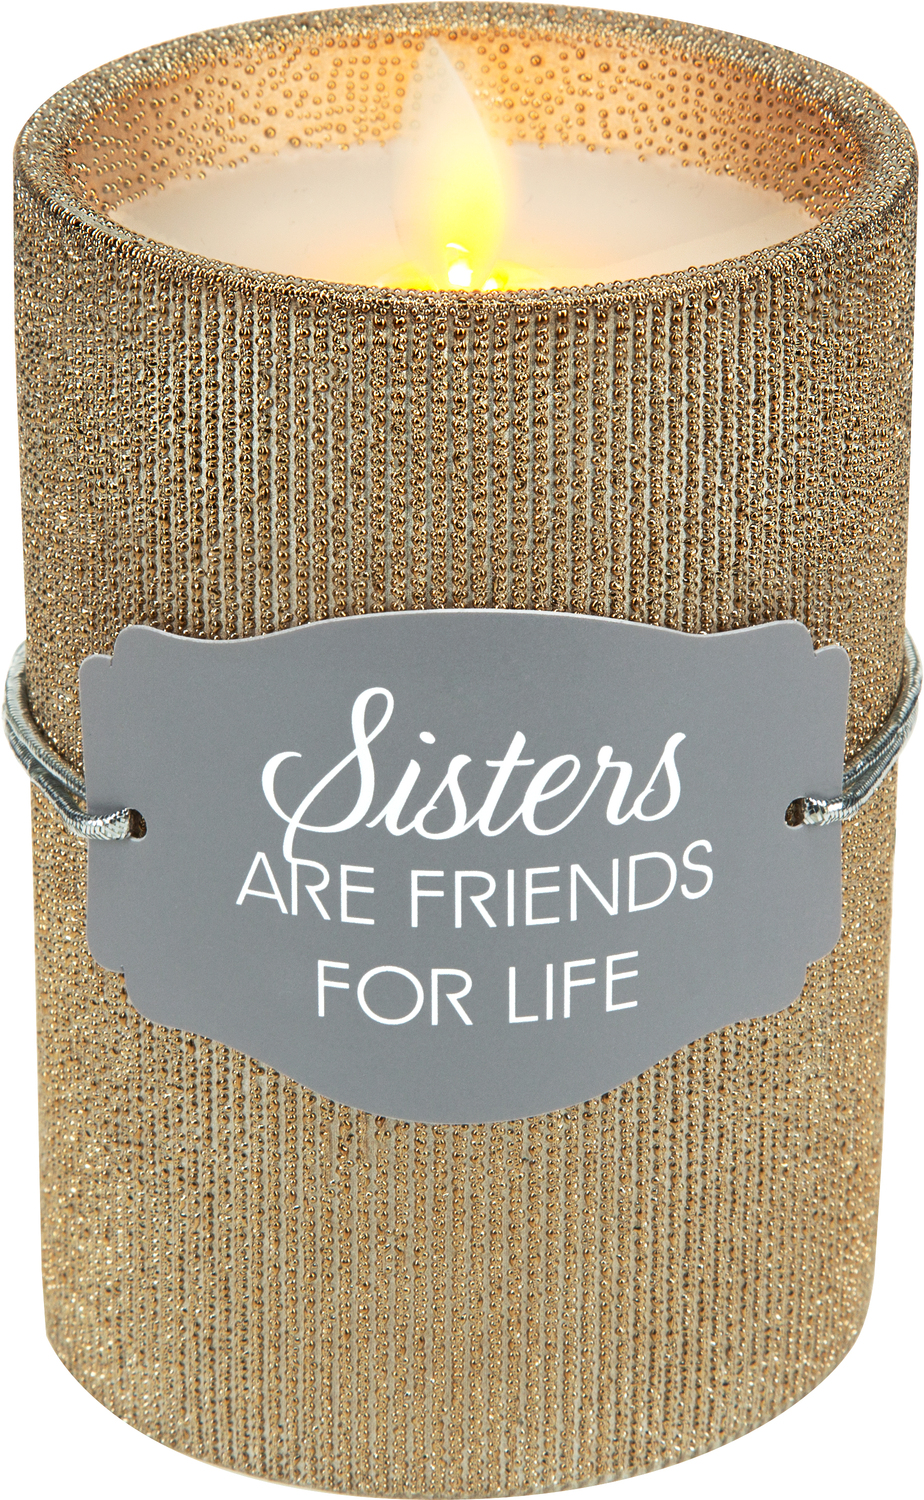 Sister by Candle Decor - Sister - 4.75" Bronze Glitter Realistic Flame Candle 